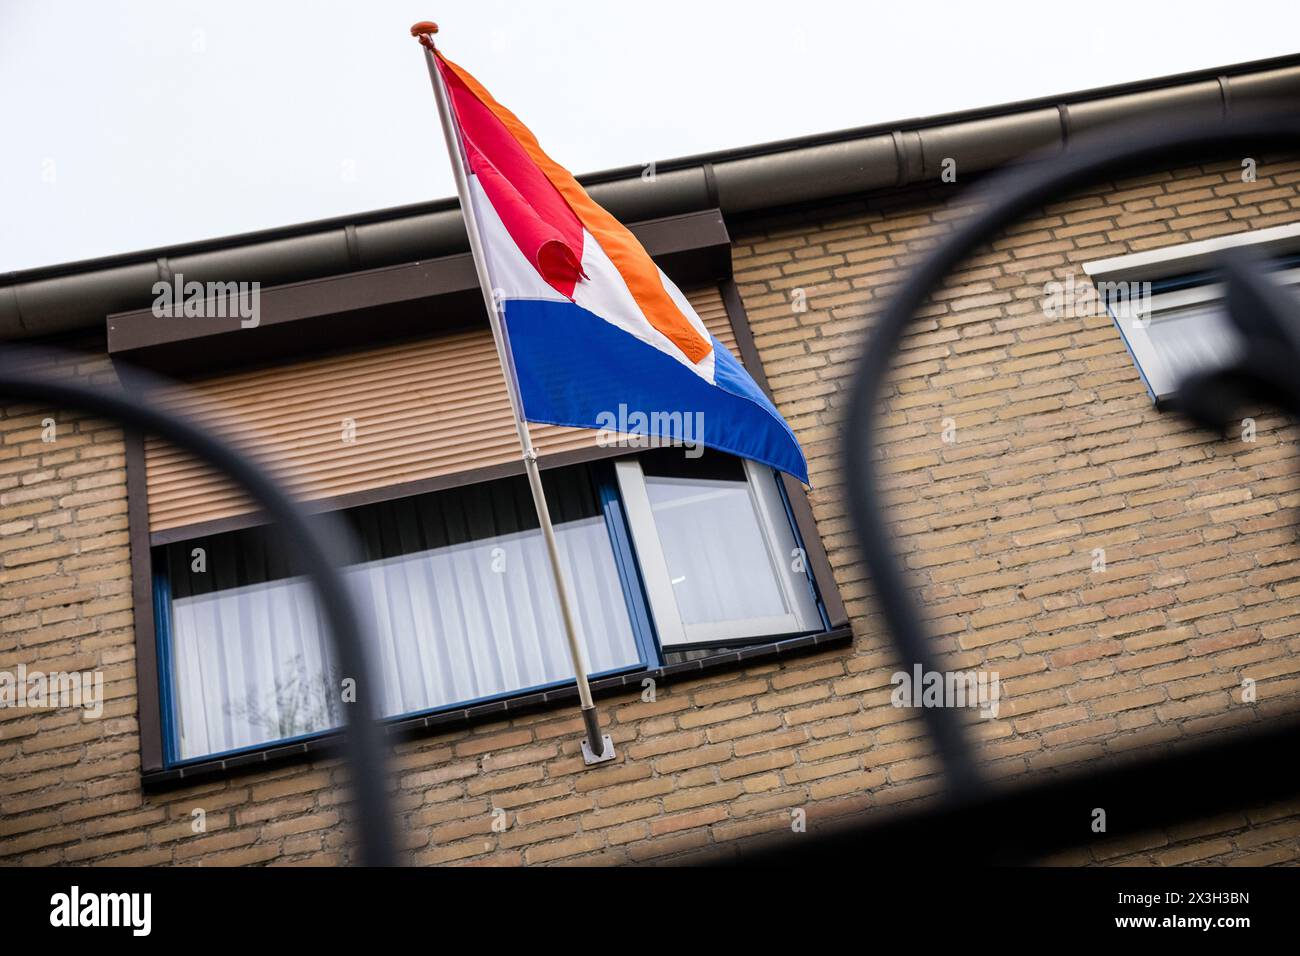 MIERLO - The Dutch flag with an orange pennant is flying for King's Day. While the royal family visits Emmen, the national holiday is also being fully celebrated in the rest of the country. ANP ROB ENGELAAR netherlands out - belgium out Stock Photo